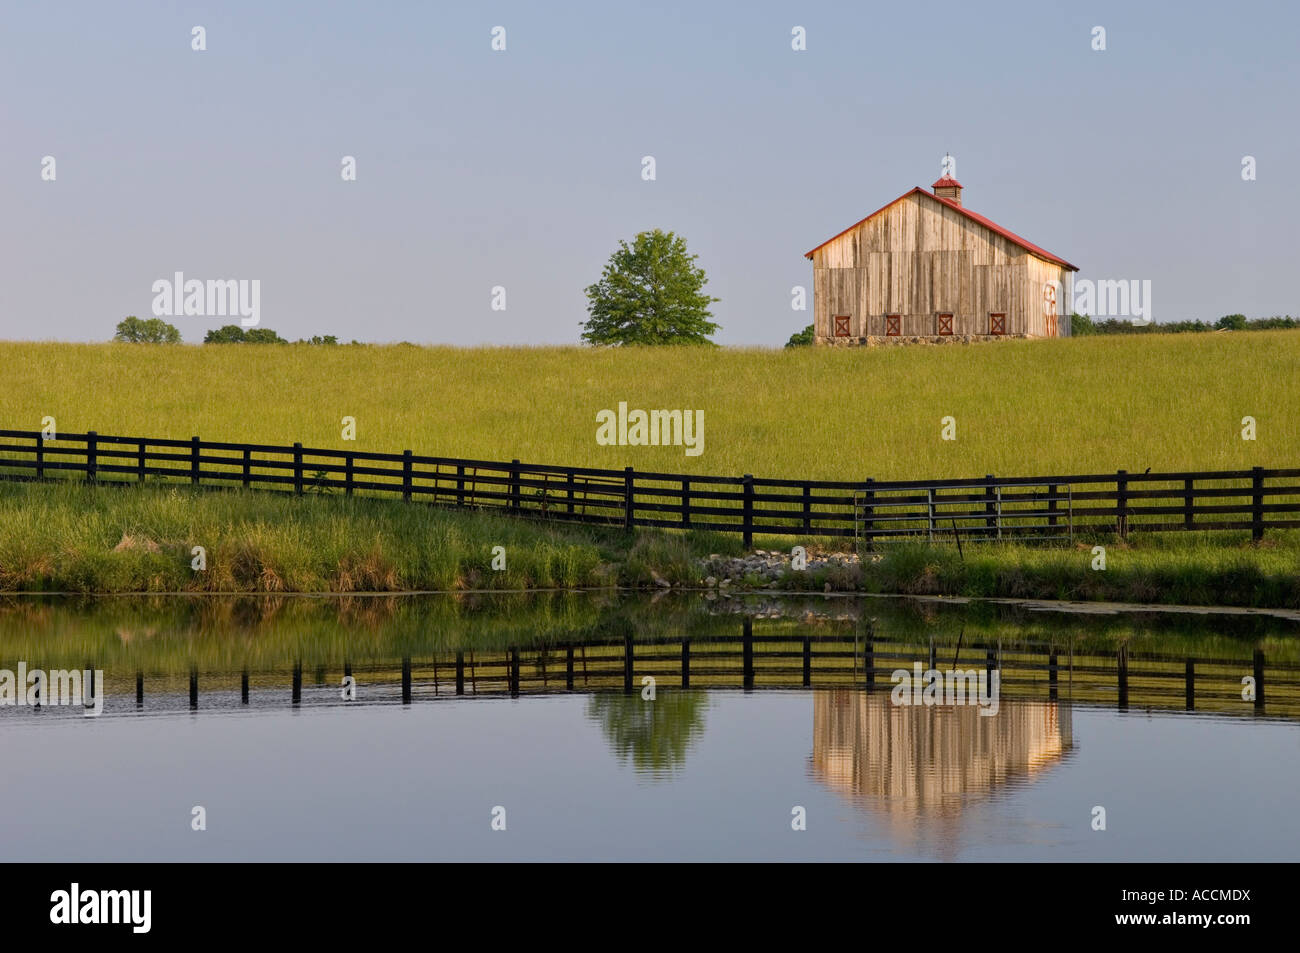 Black Wood Fence Pasture and Barn Reflecting in Pond Near Starlight Indiana Stock Photo